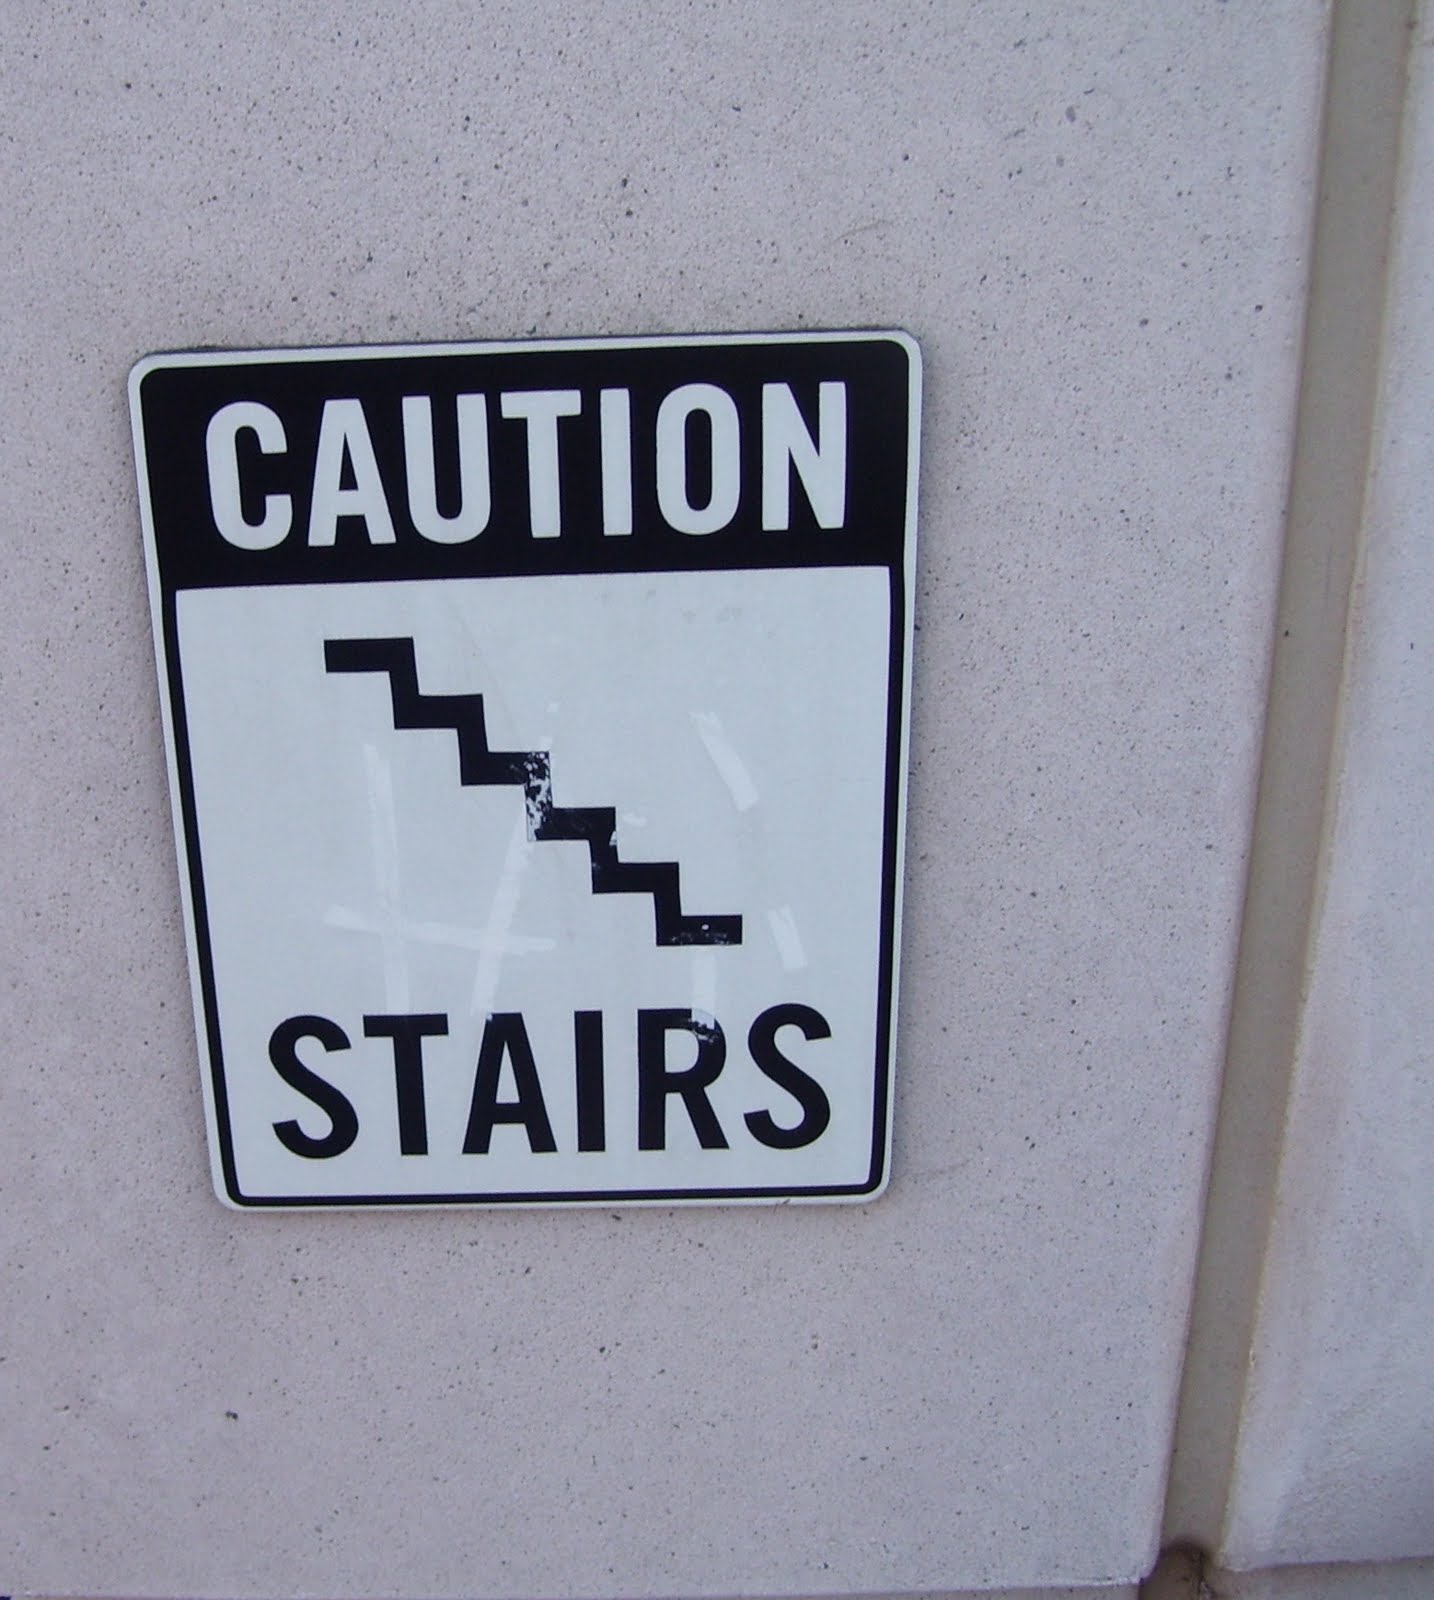 andy-s-wild-blog-caution-stairs